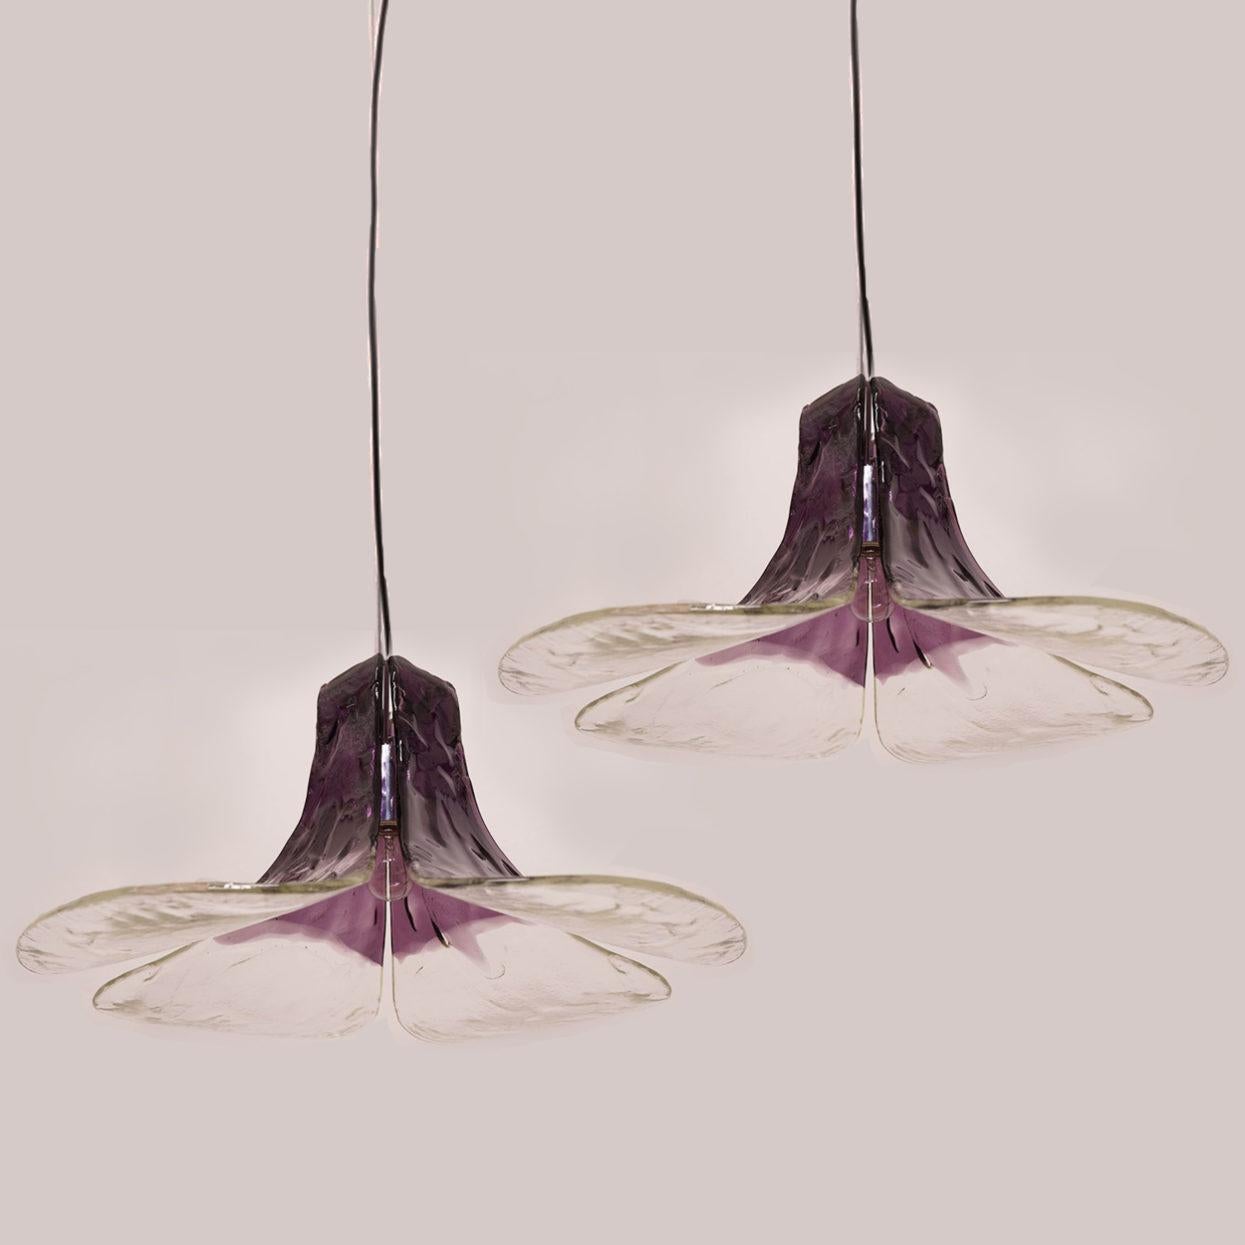 1 of the 2 beautiful mid century Carlo Nason for Mazzega floral pendants in clear and purple tinted murano glass.
Four individual glass murano leaves mounted on a metal frame.

We can deliver divered colors of cord, an steel cable and transparant